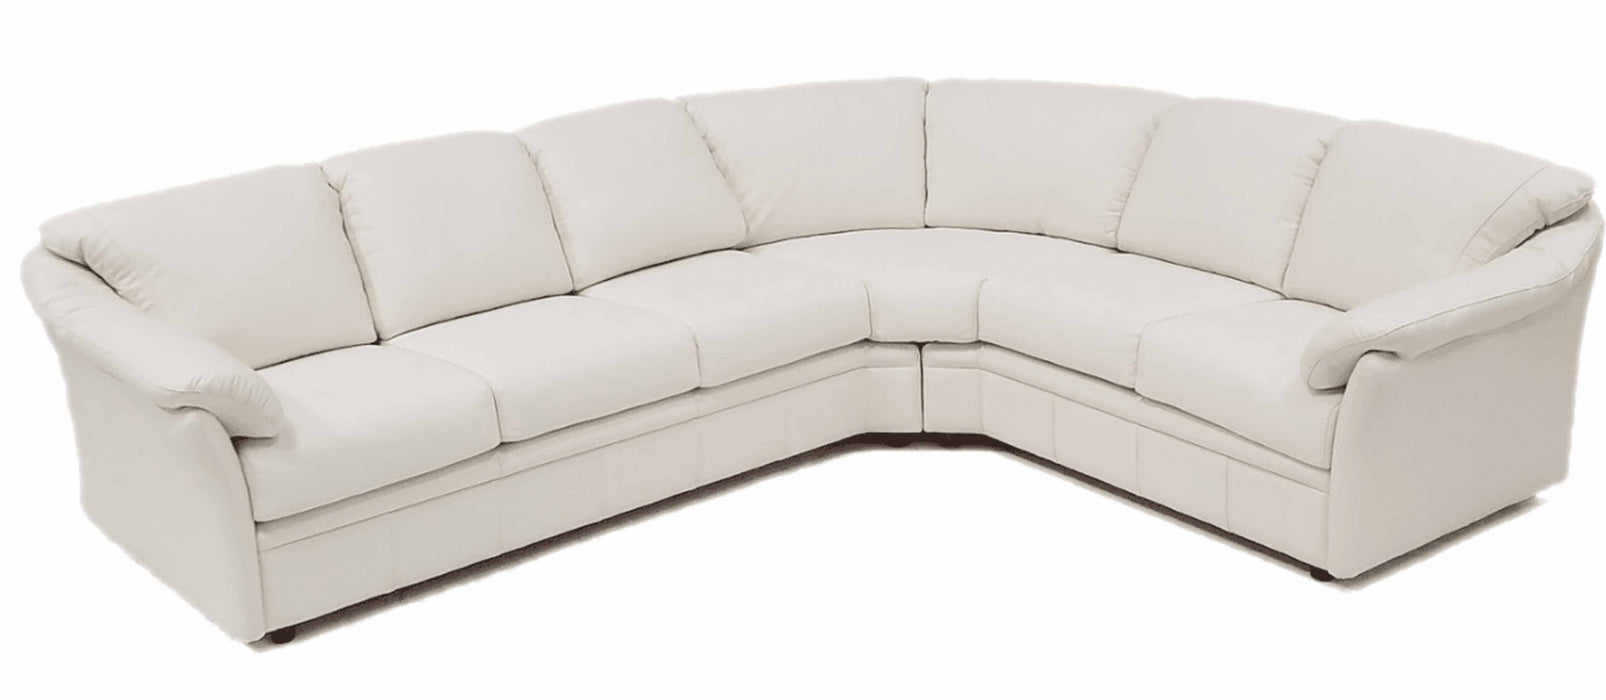 Salerno Leather Sectional | American Style | Wellington's Fine Leather Furniture